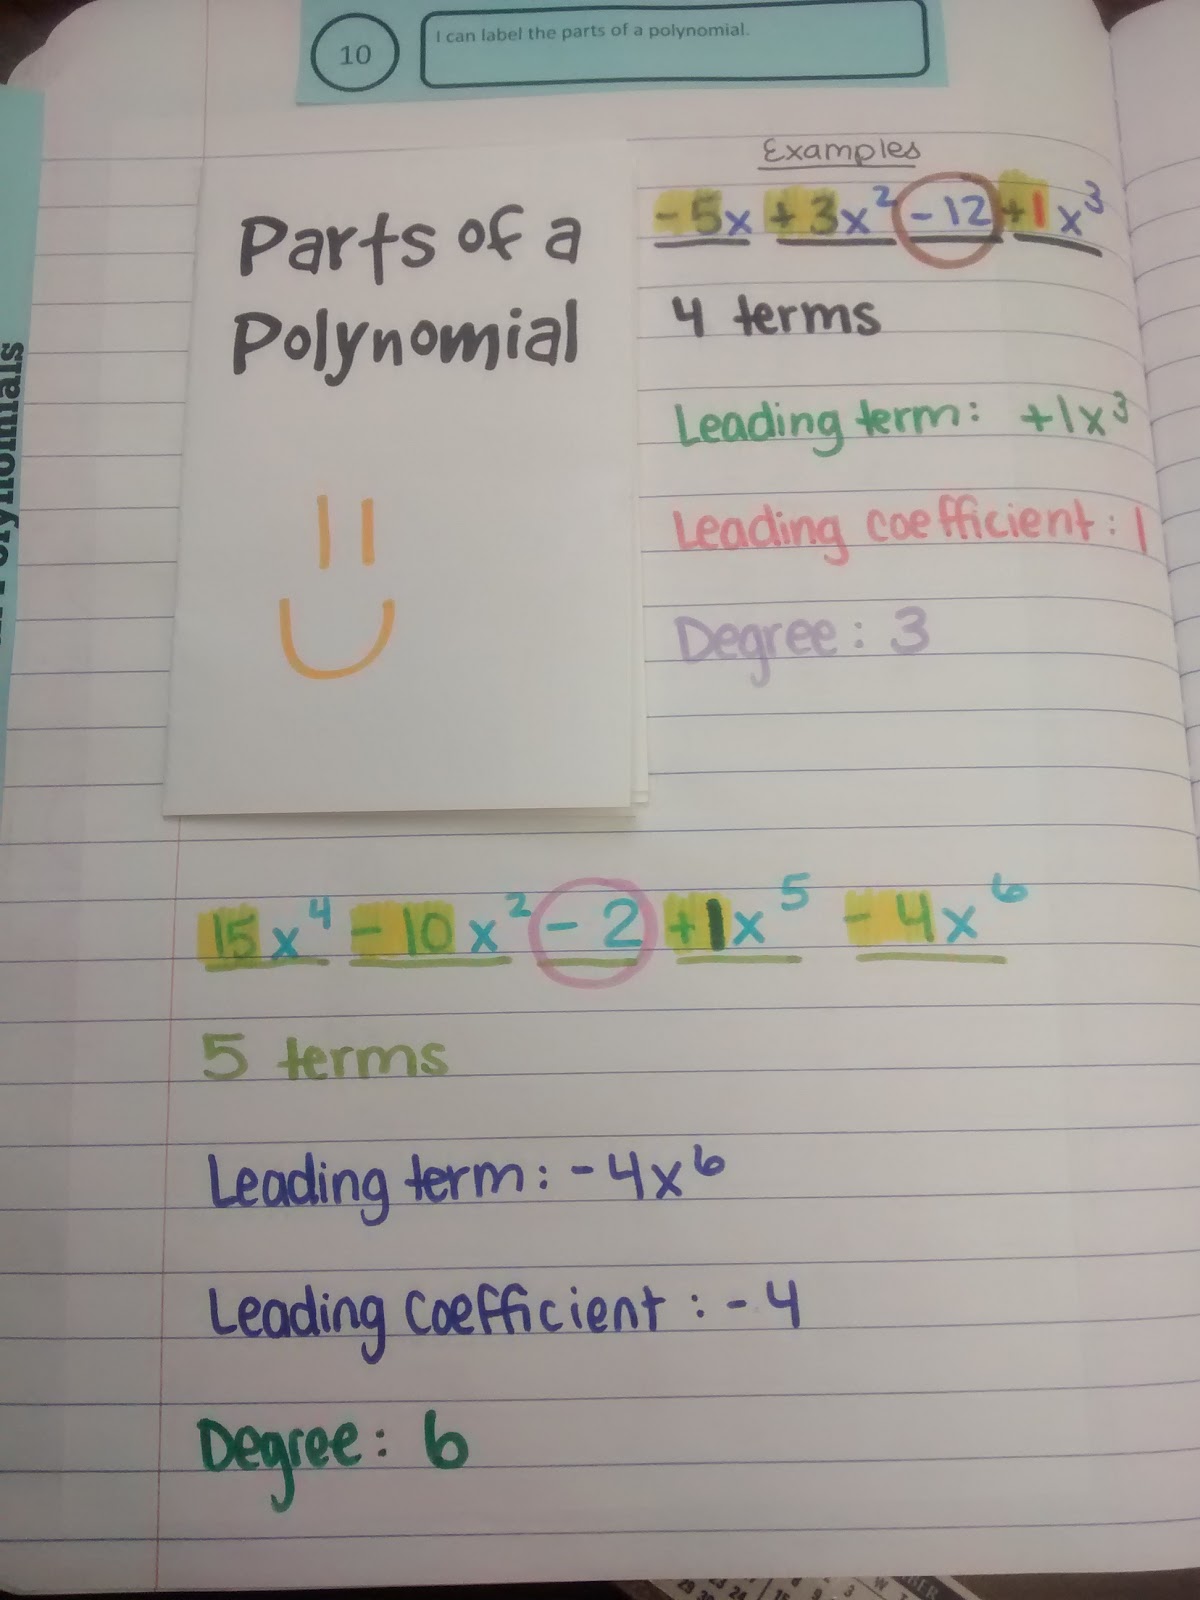 Parts of a Polynomial Practice Book